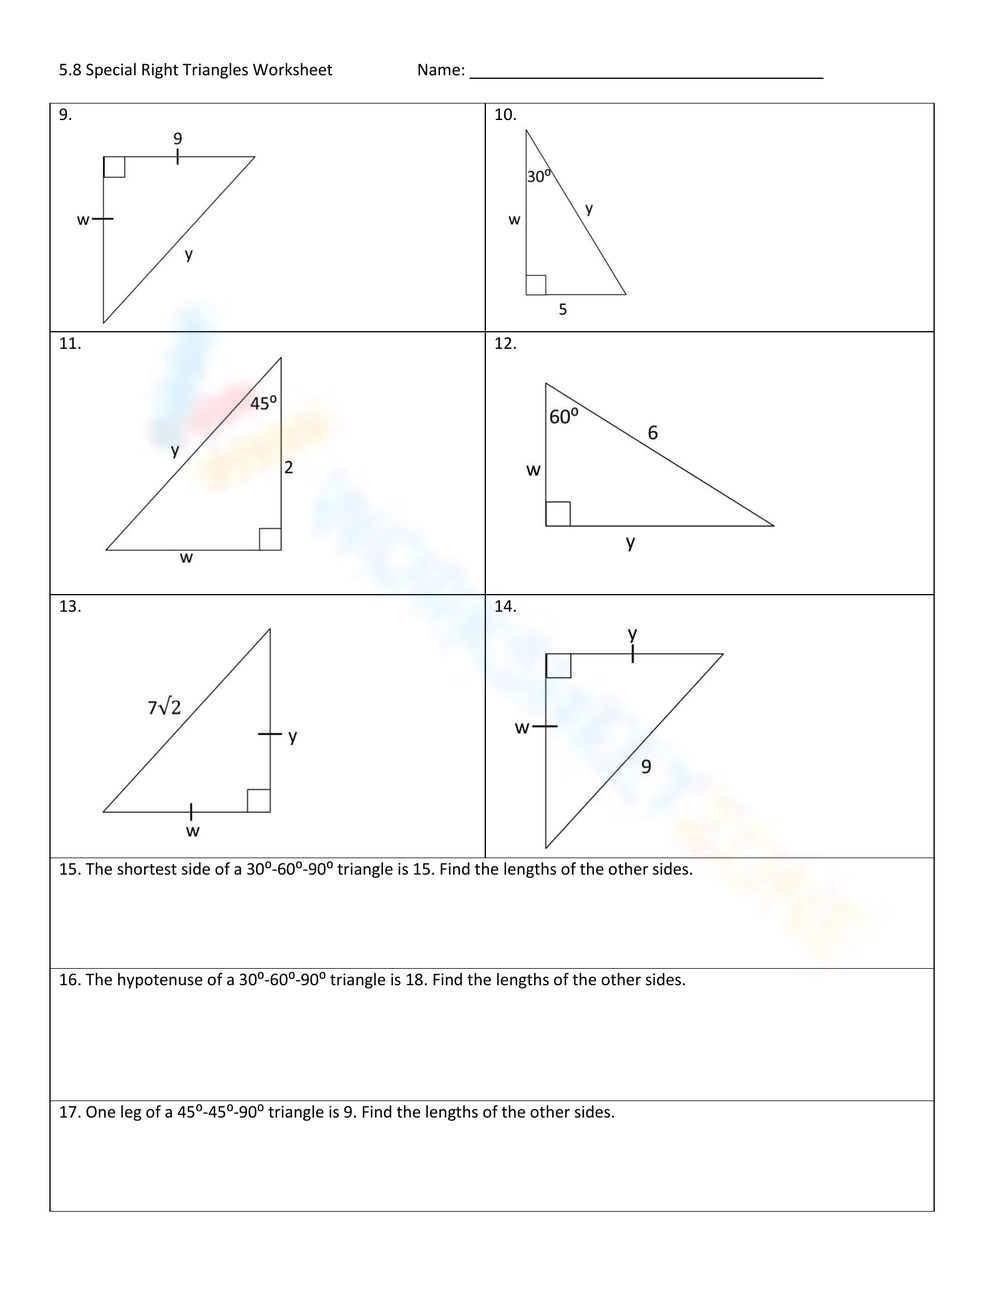 Special Right Triangles Worksheet 1 Worksheet 2838